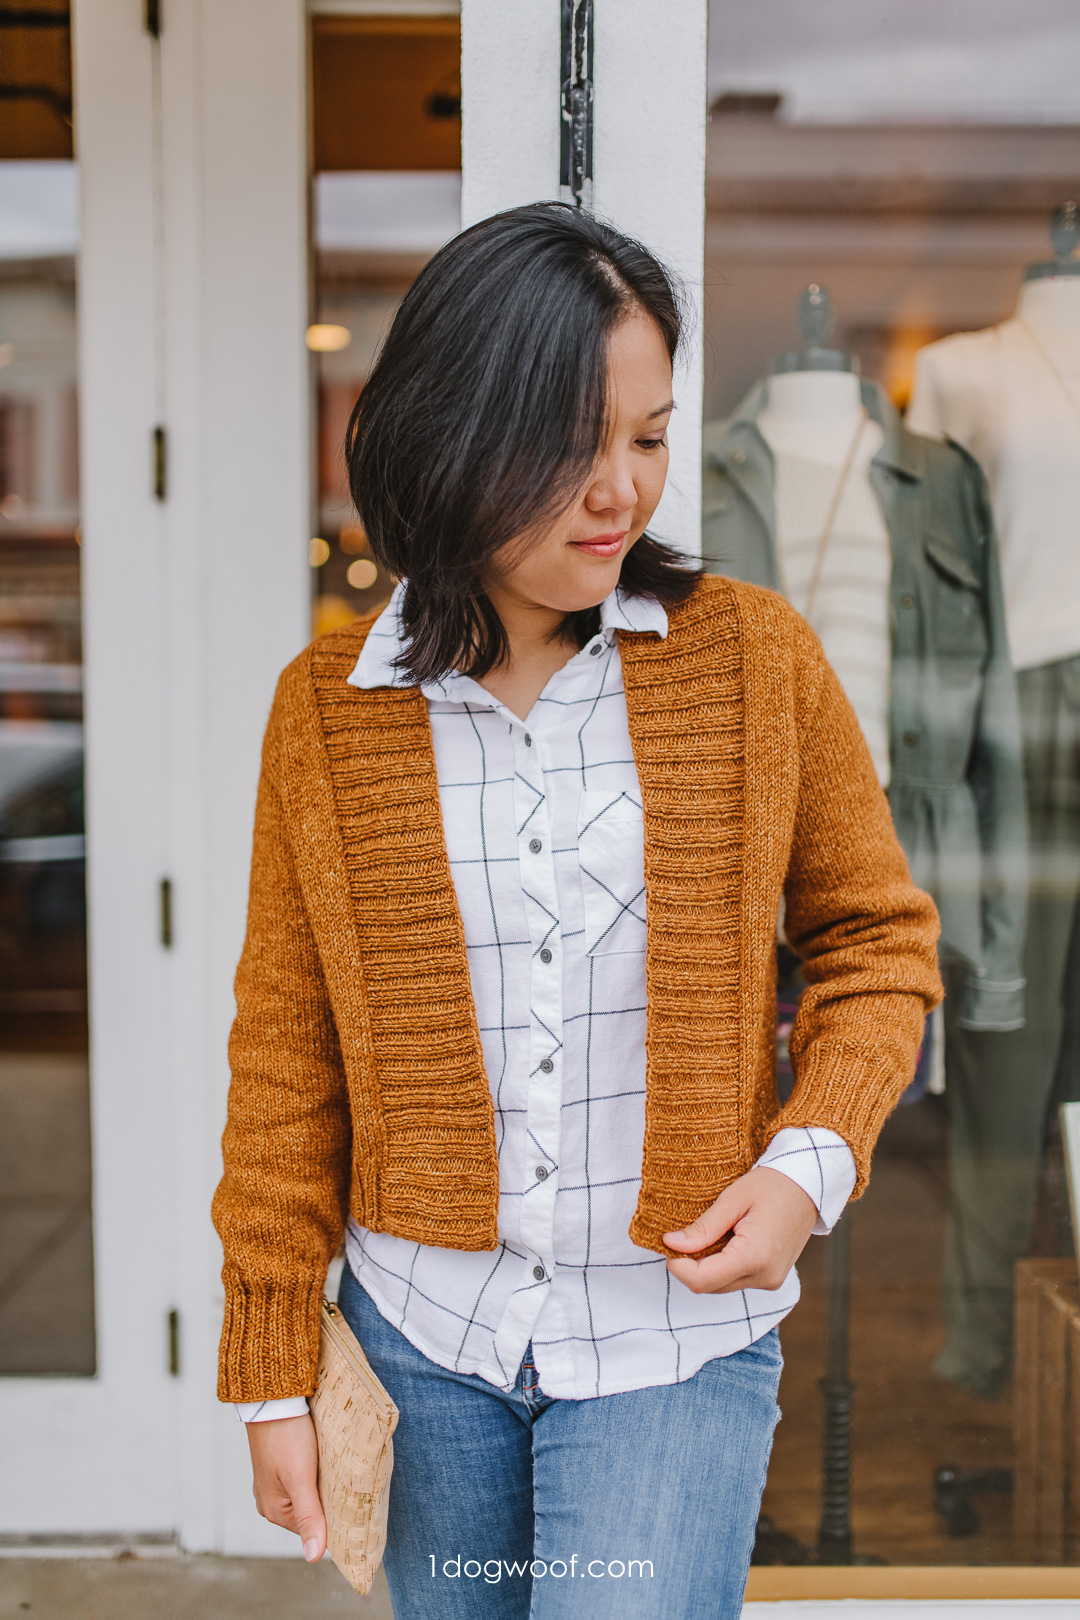 The Firefly Cardigan: A Perfect Fall Knit